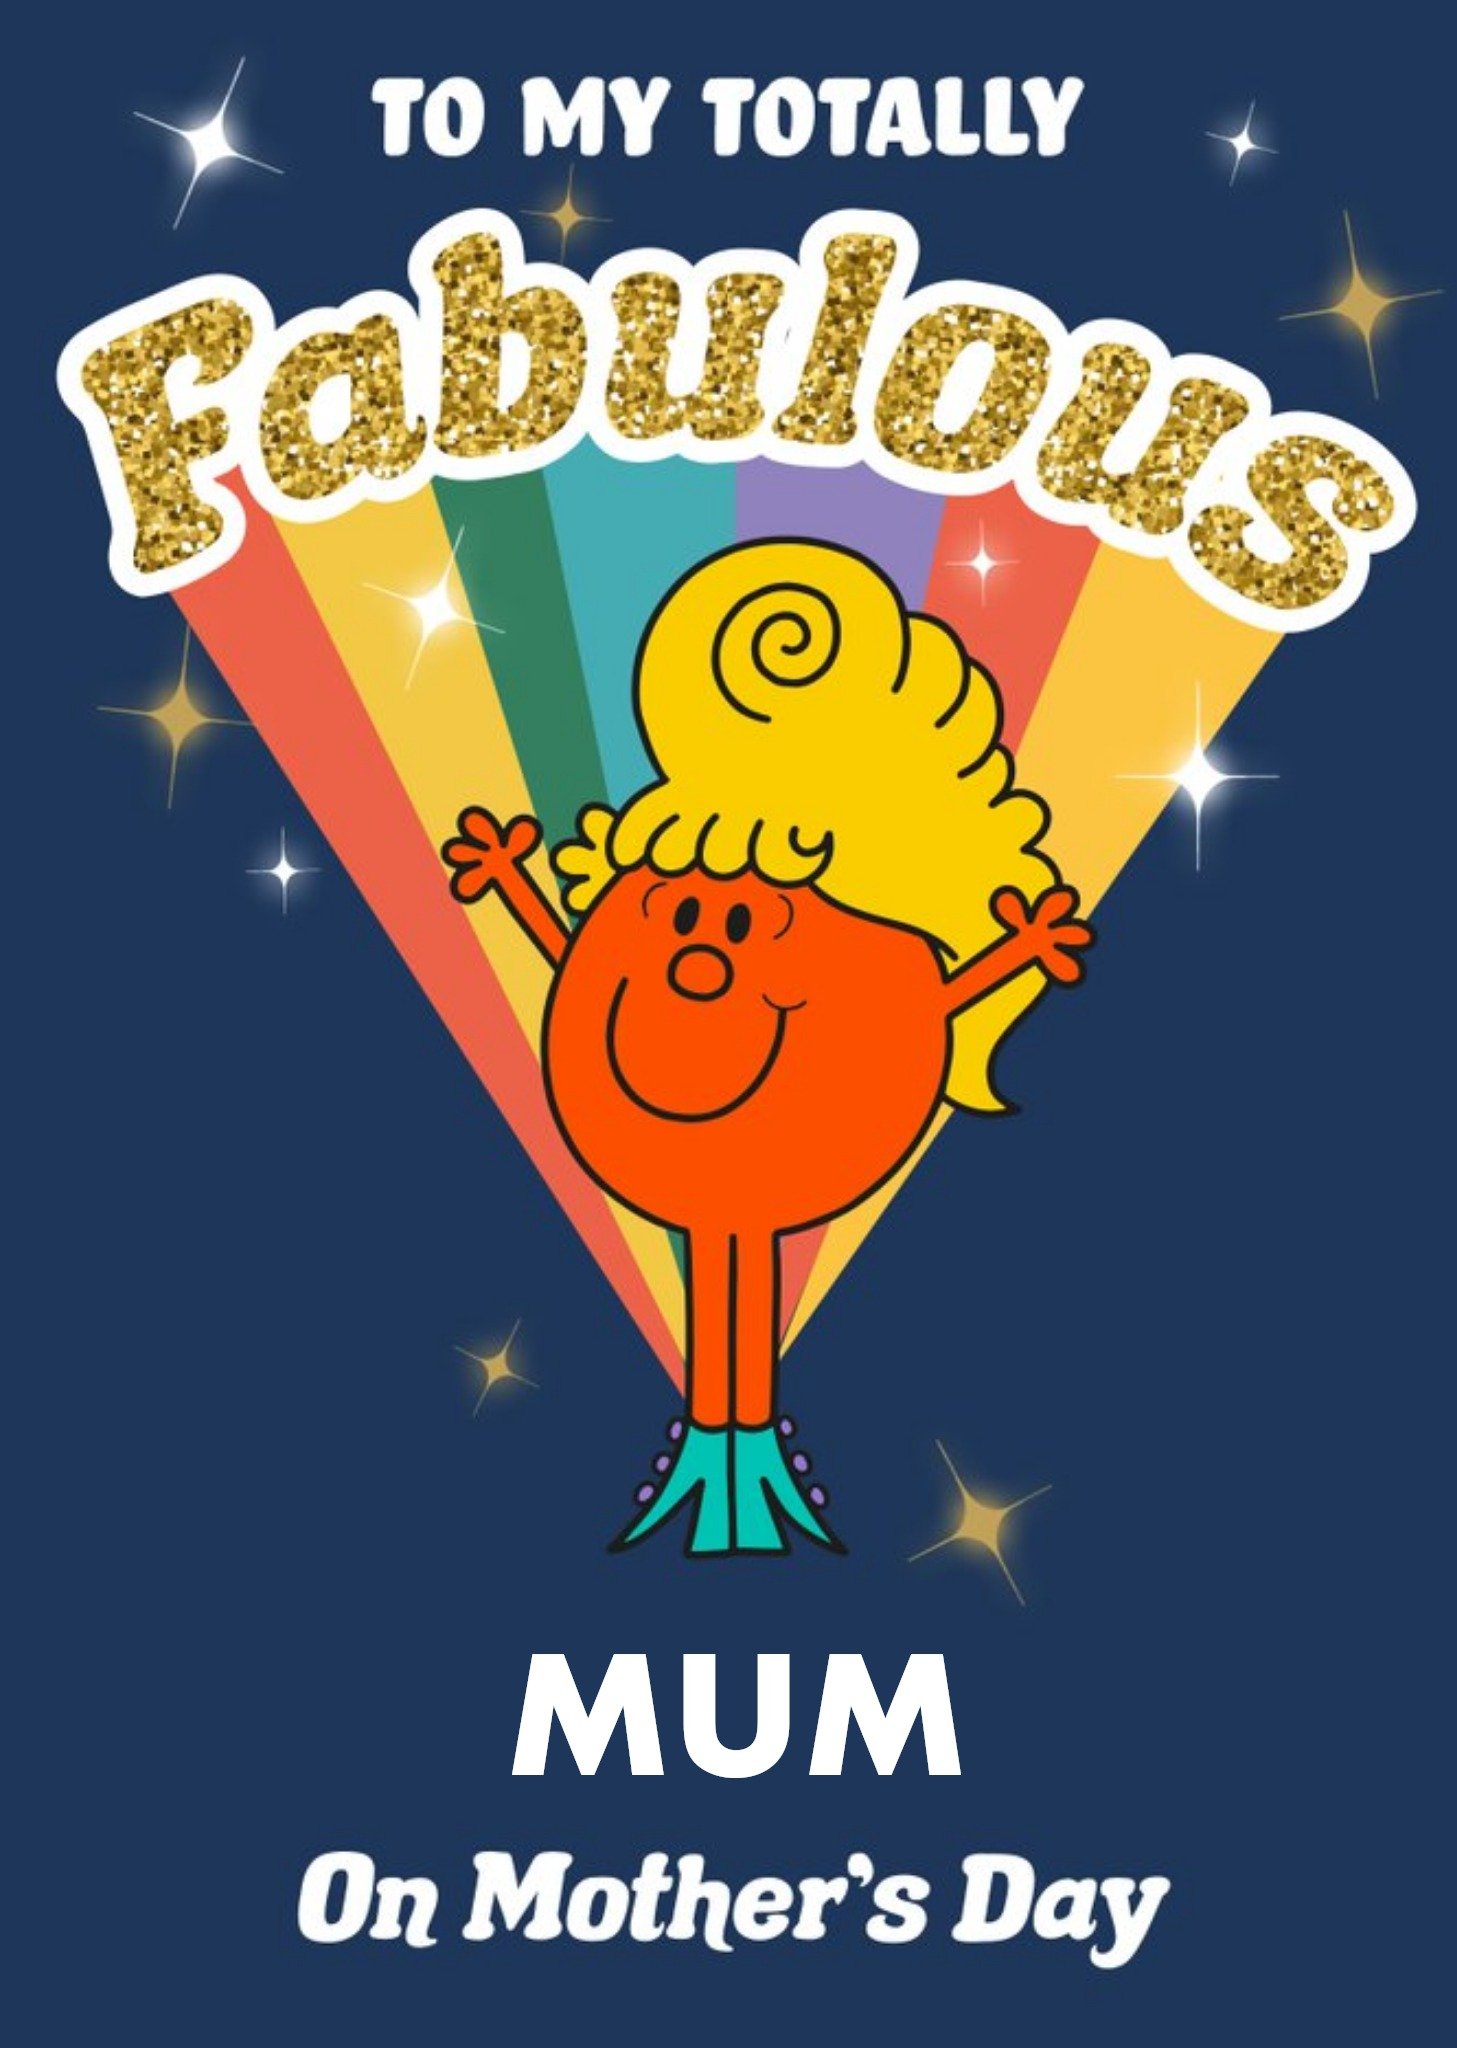 Mr Men To My Totally Fabulous Mum Mother's Day Card Ecard